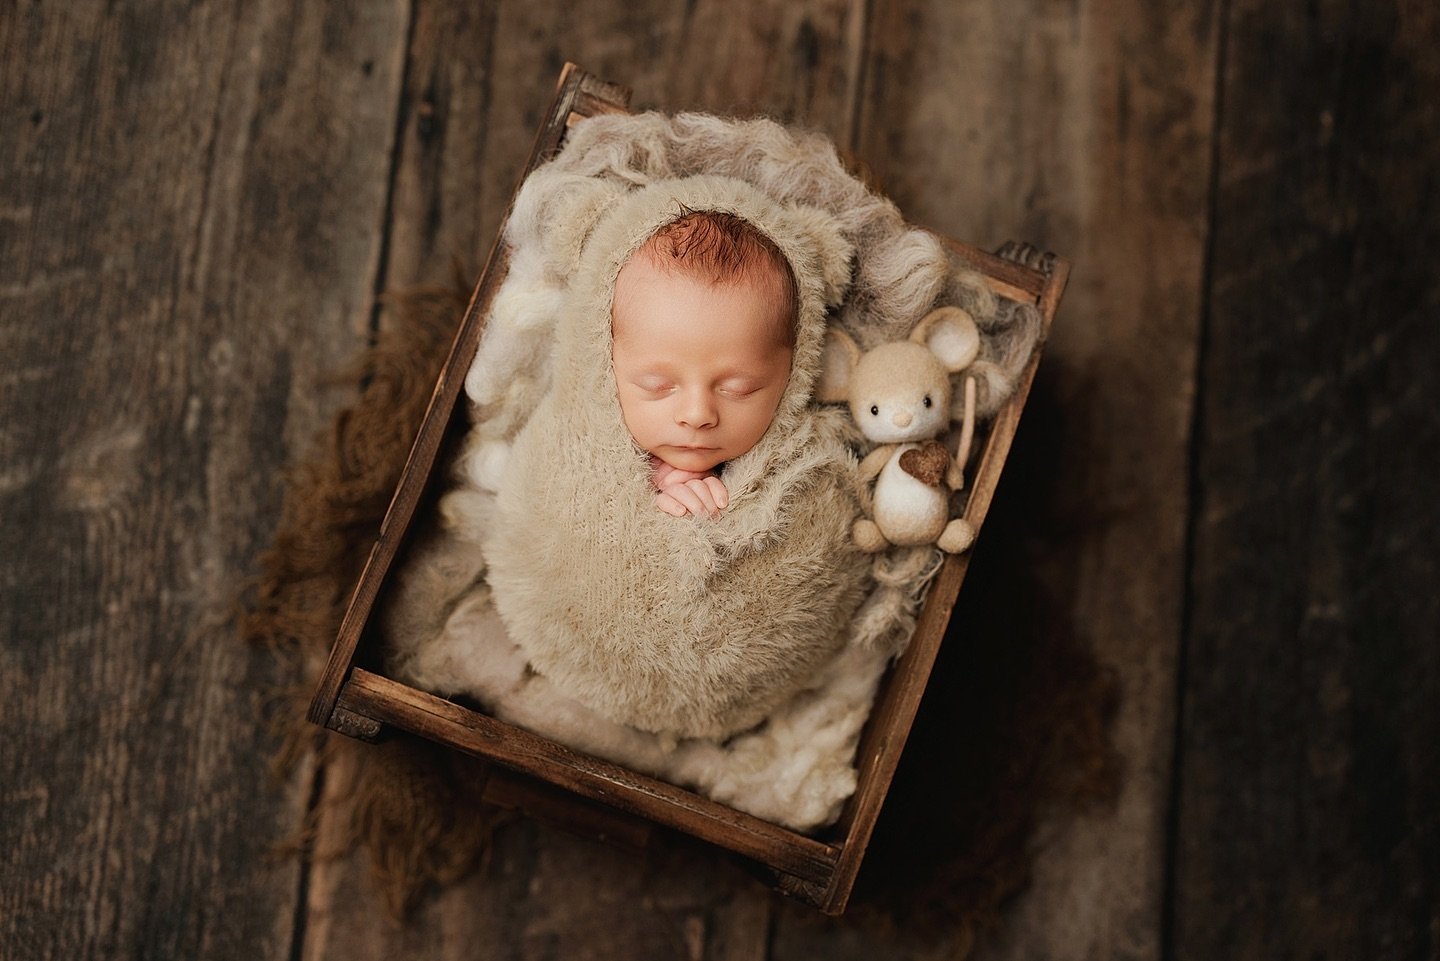 little bear and his friend

#frisconewbornphotographer
#planonewbornphotographer
#dallasnewbornphotographer #mckinneyphotographer
#lewisvillenewbornphotographer #newbornphotography
#newbornposing
#fortworthnewbornphotographer #babyphotography
#newbor